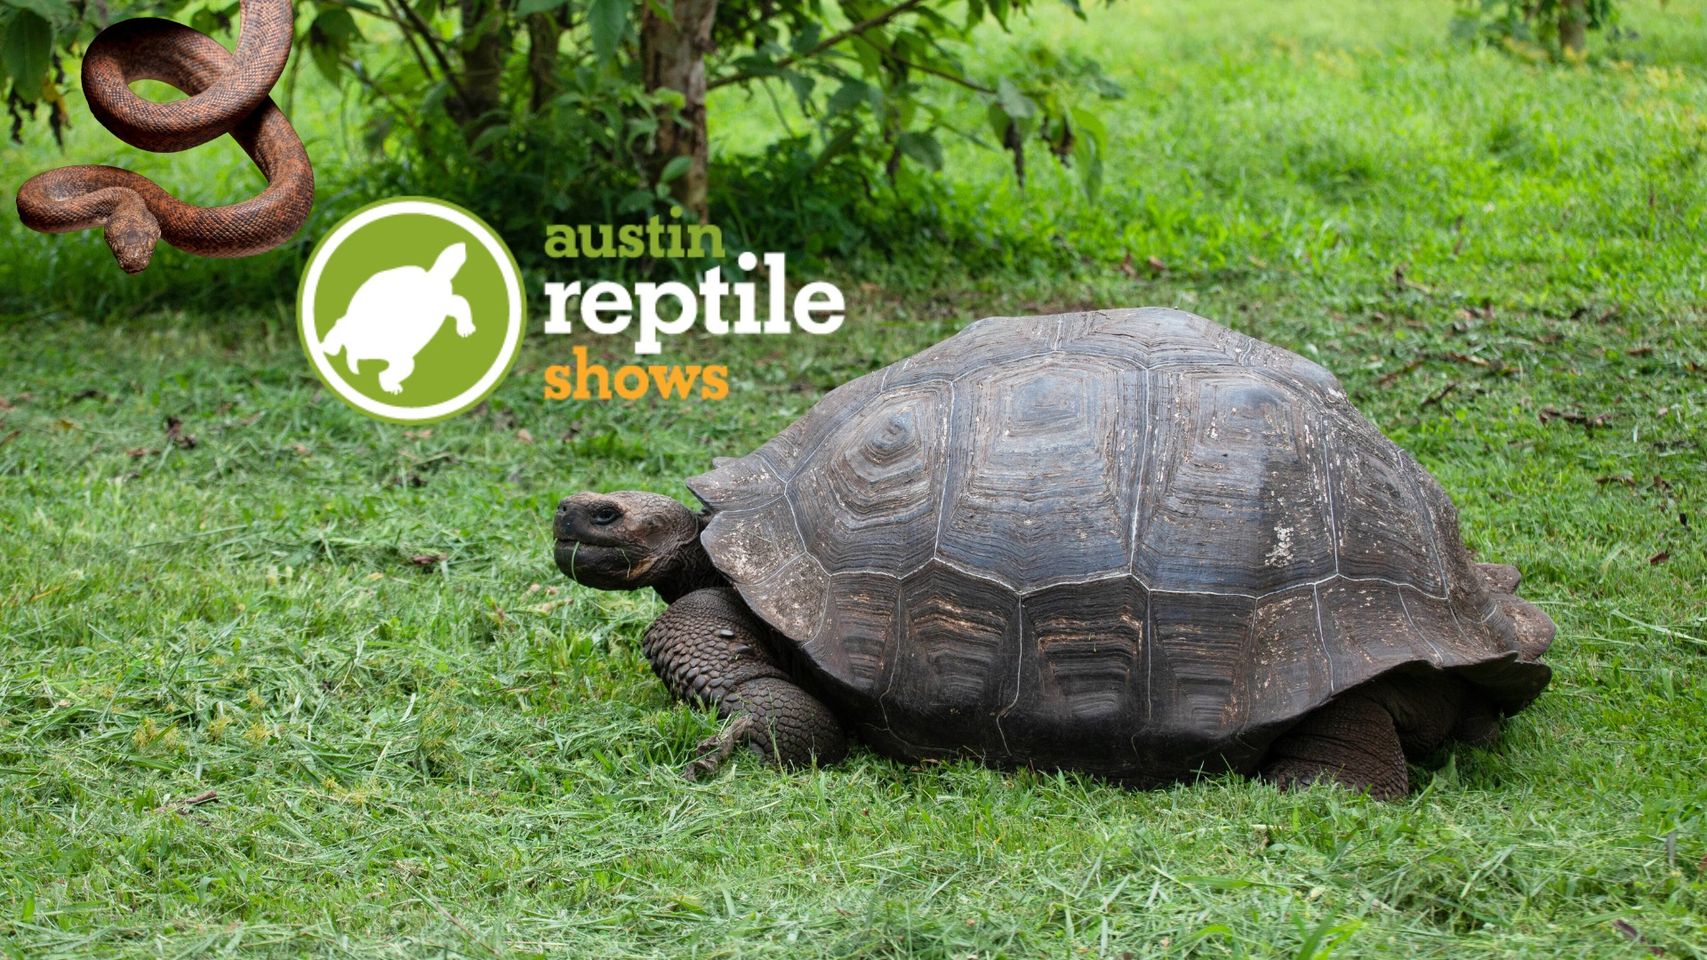 Austin Reptile Show at The Library At Cedar Creek Lake 1 austin reptile shows CedarCreekLake.Online